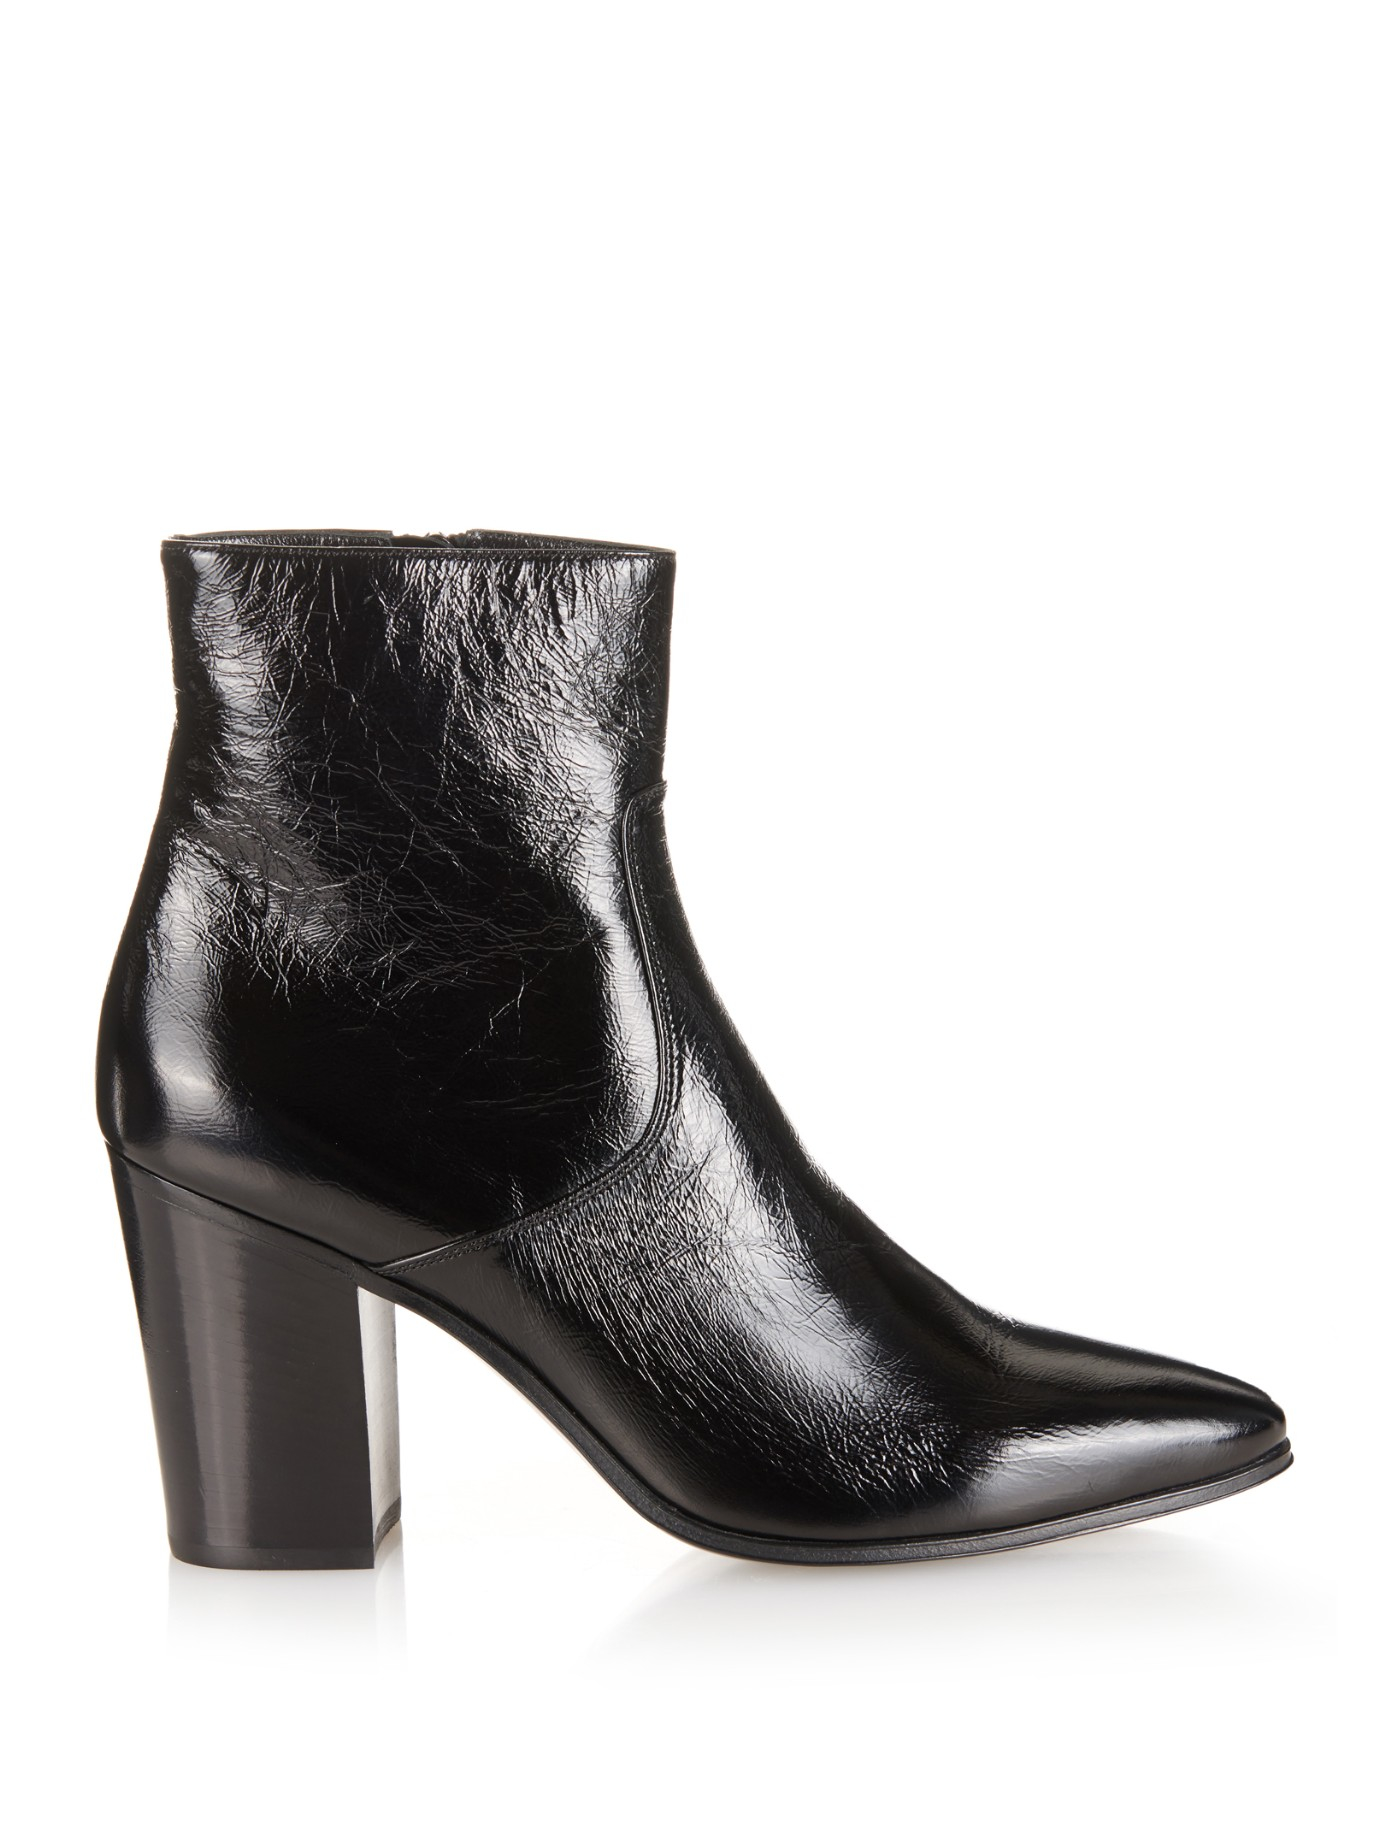 Lyst - Saint Laurent French 85 Leather Ankle Boots in Black